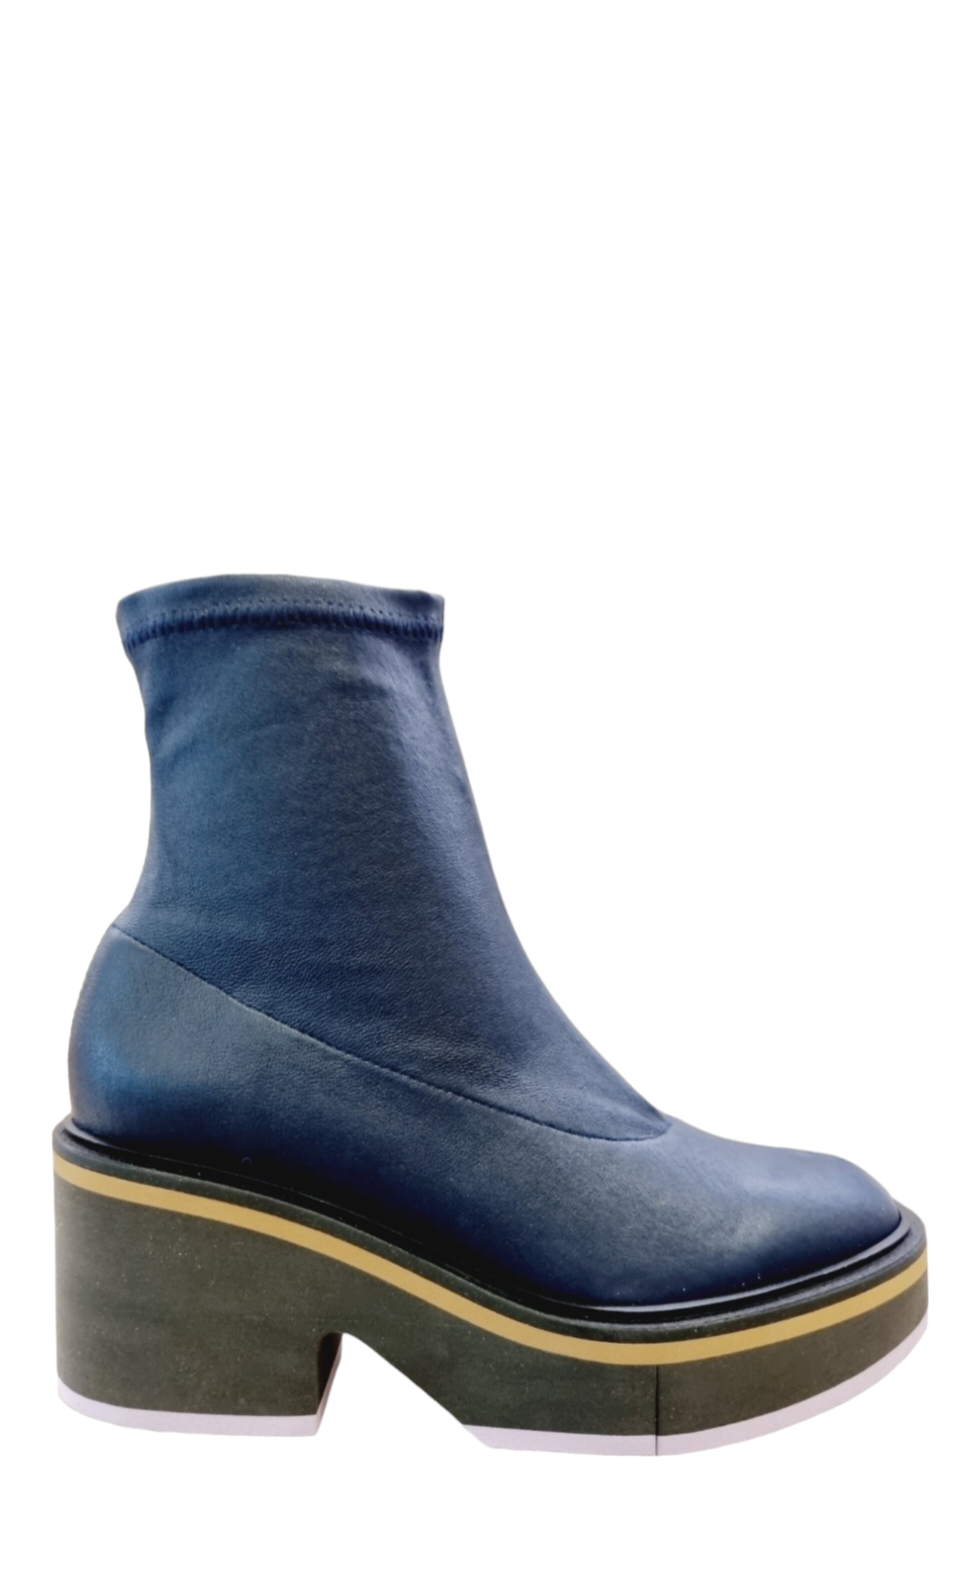 Albane Navy Leather Boots - Clergerie - Liberty Shoes Australia